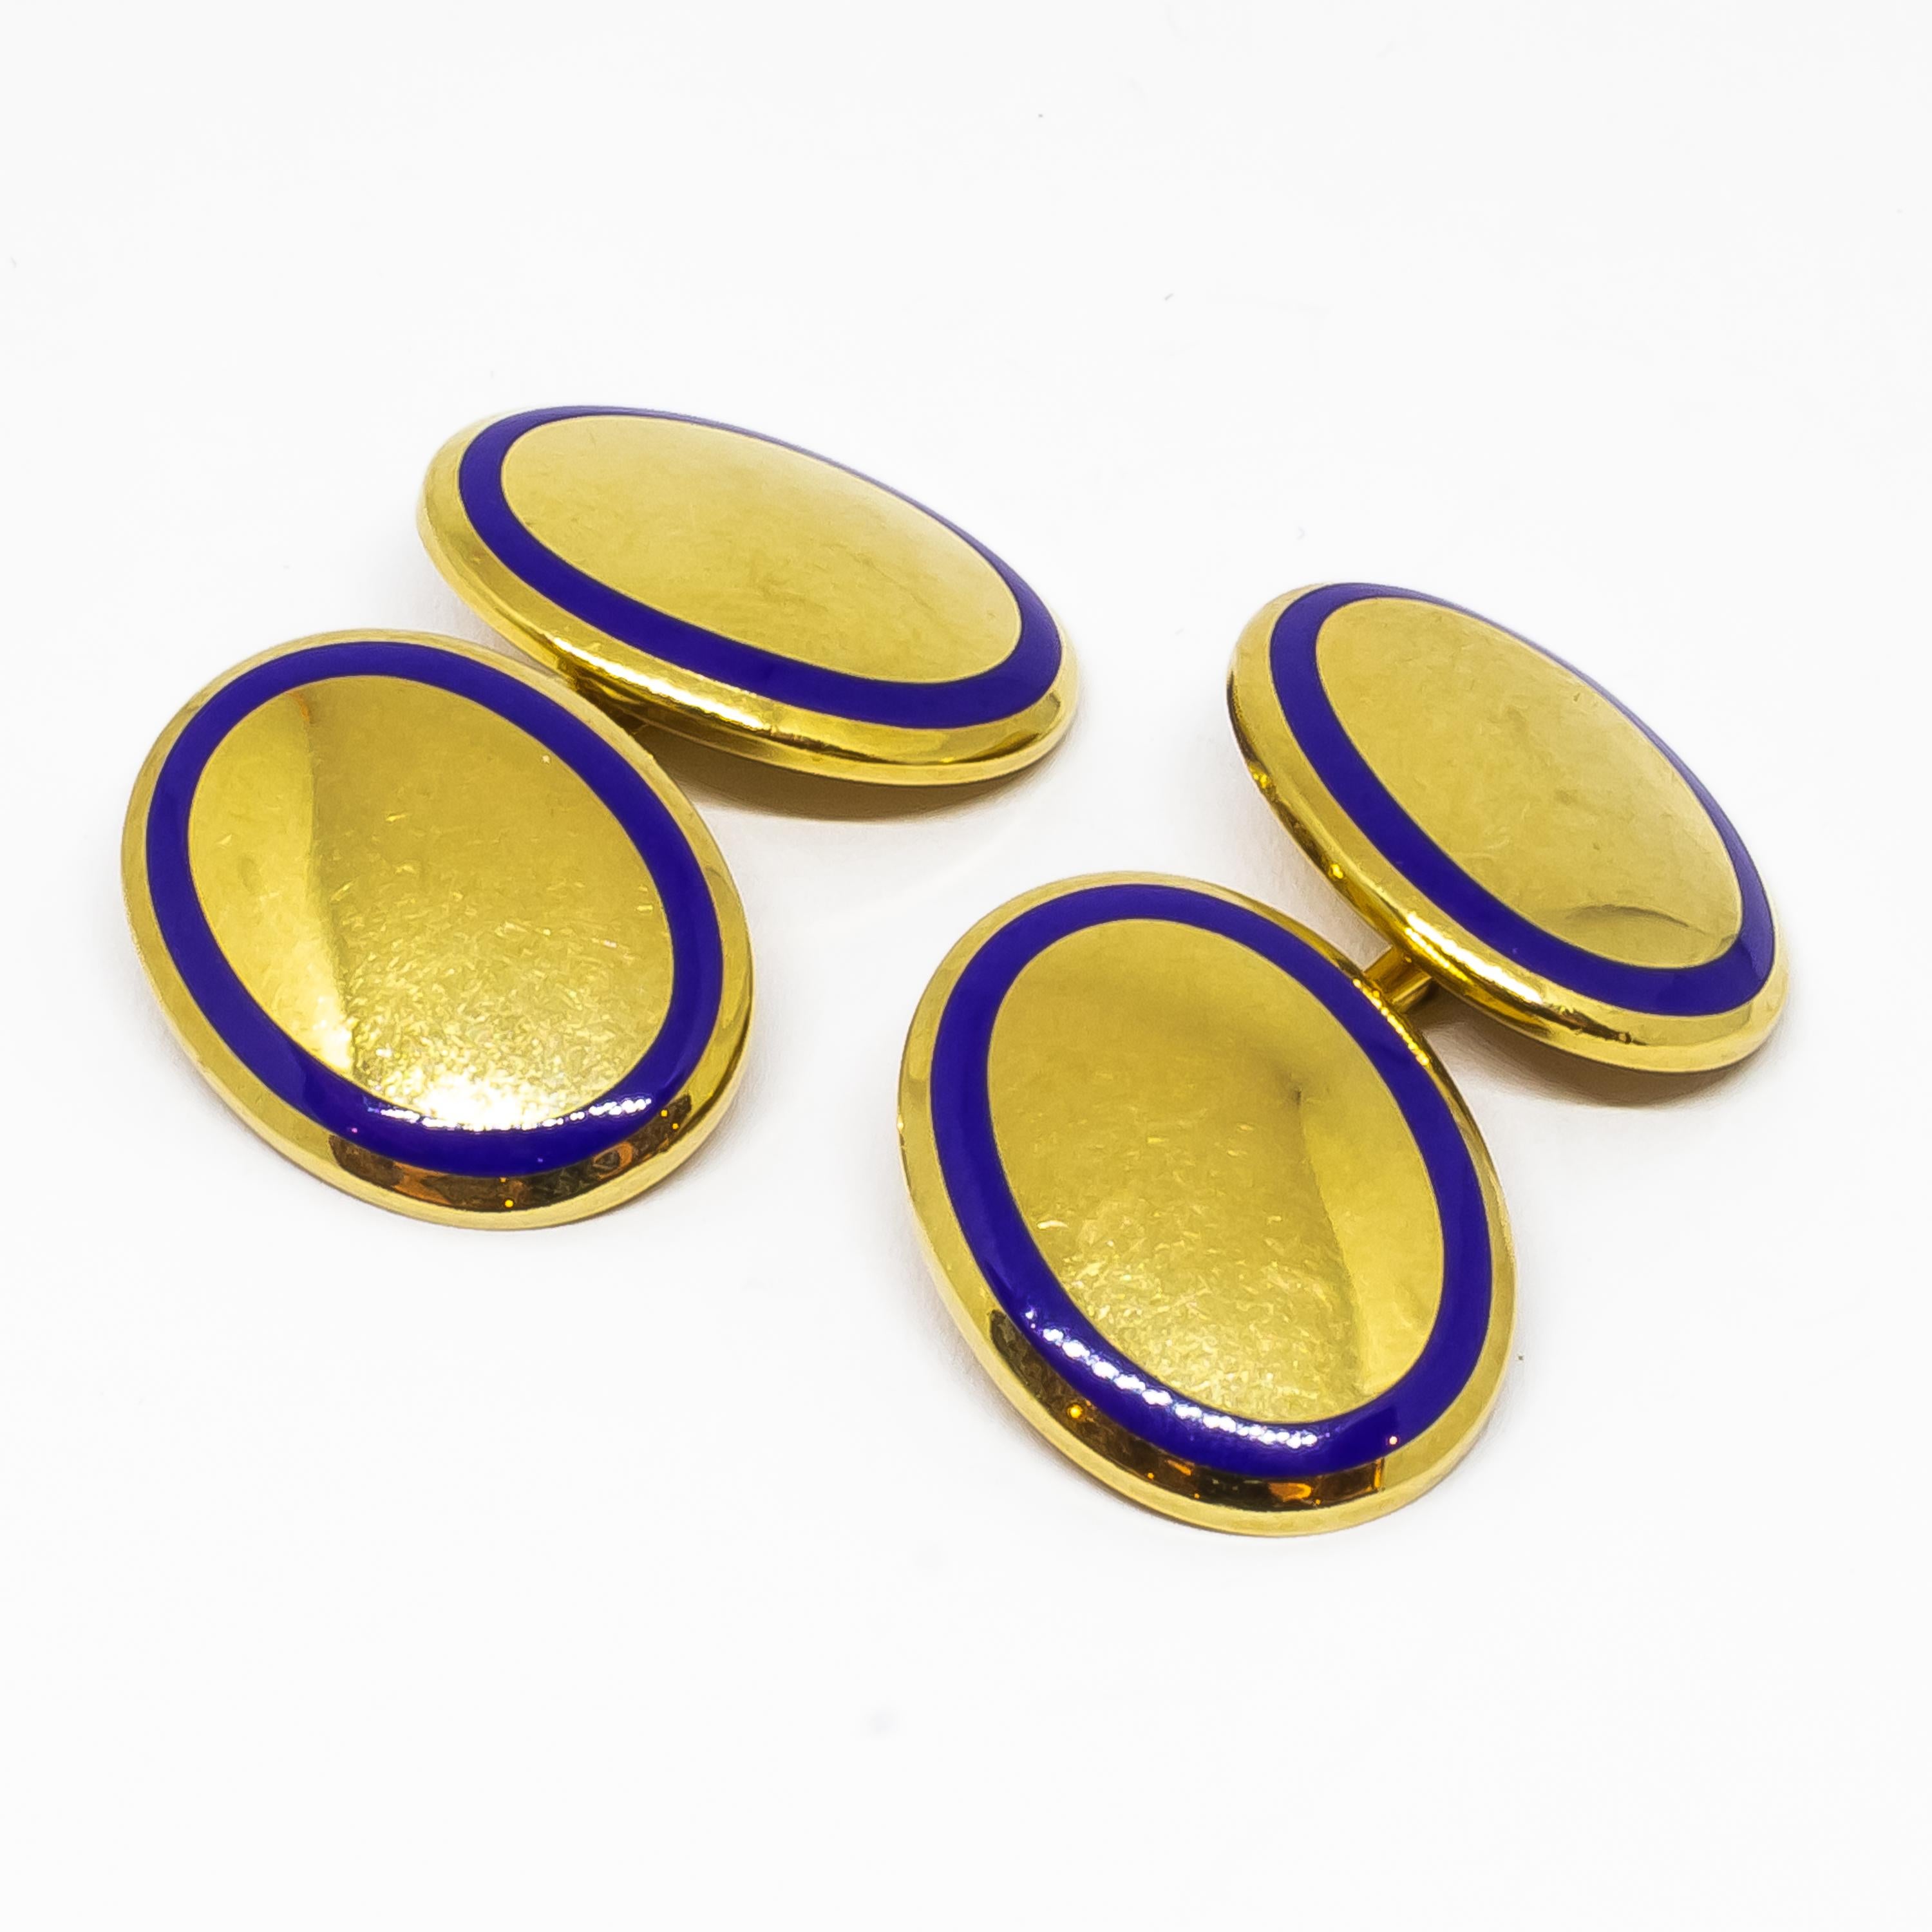 Tiffany & Co. Gold and Enamel Cufflinks In Good Condition For Sale In London, GB